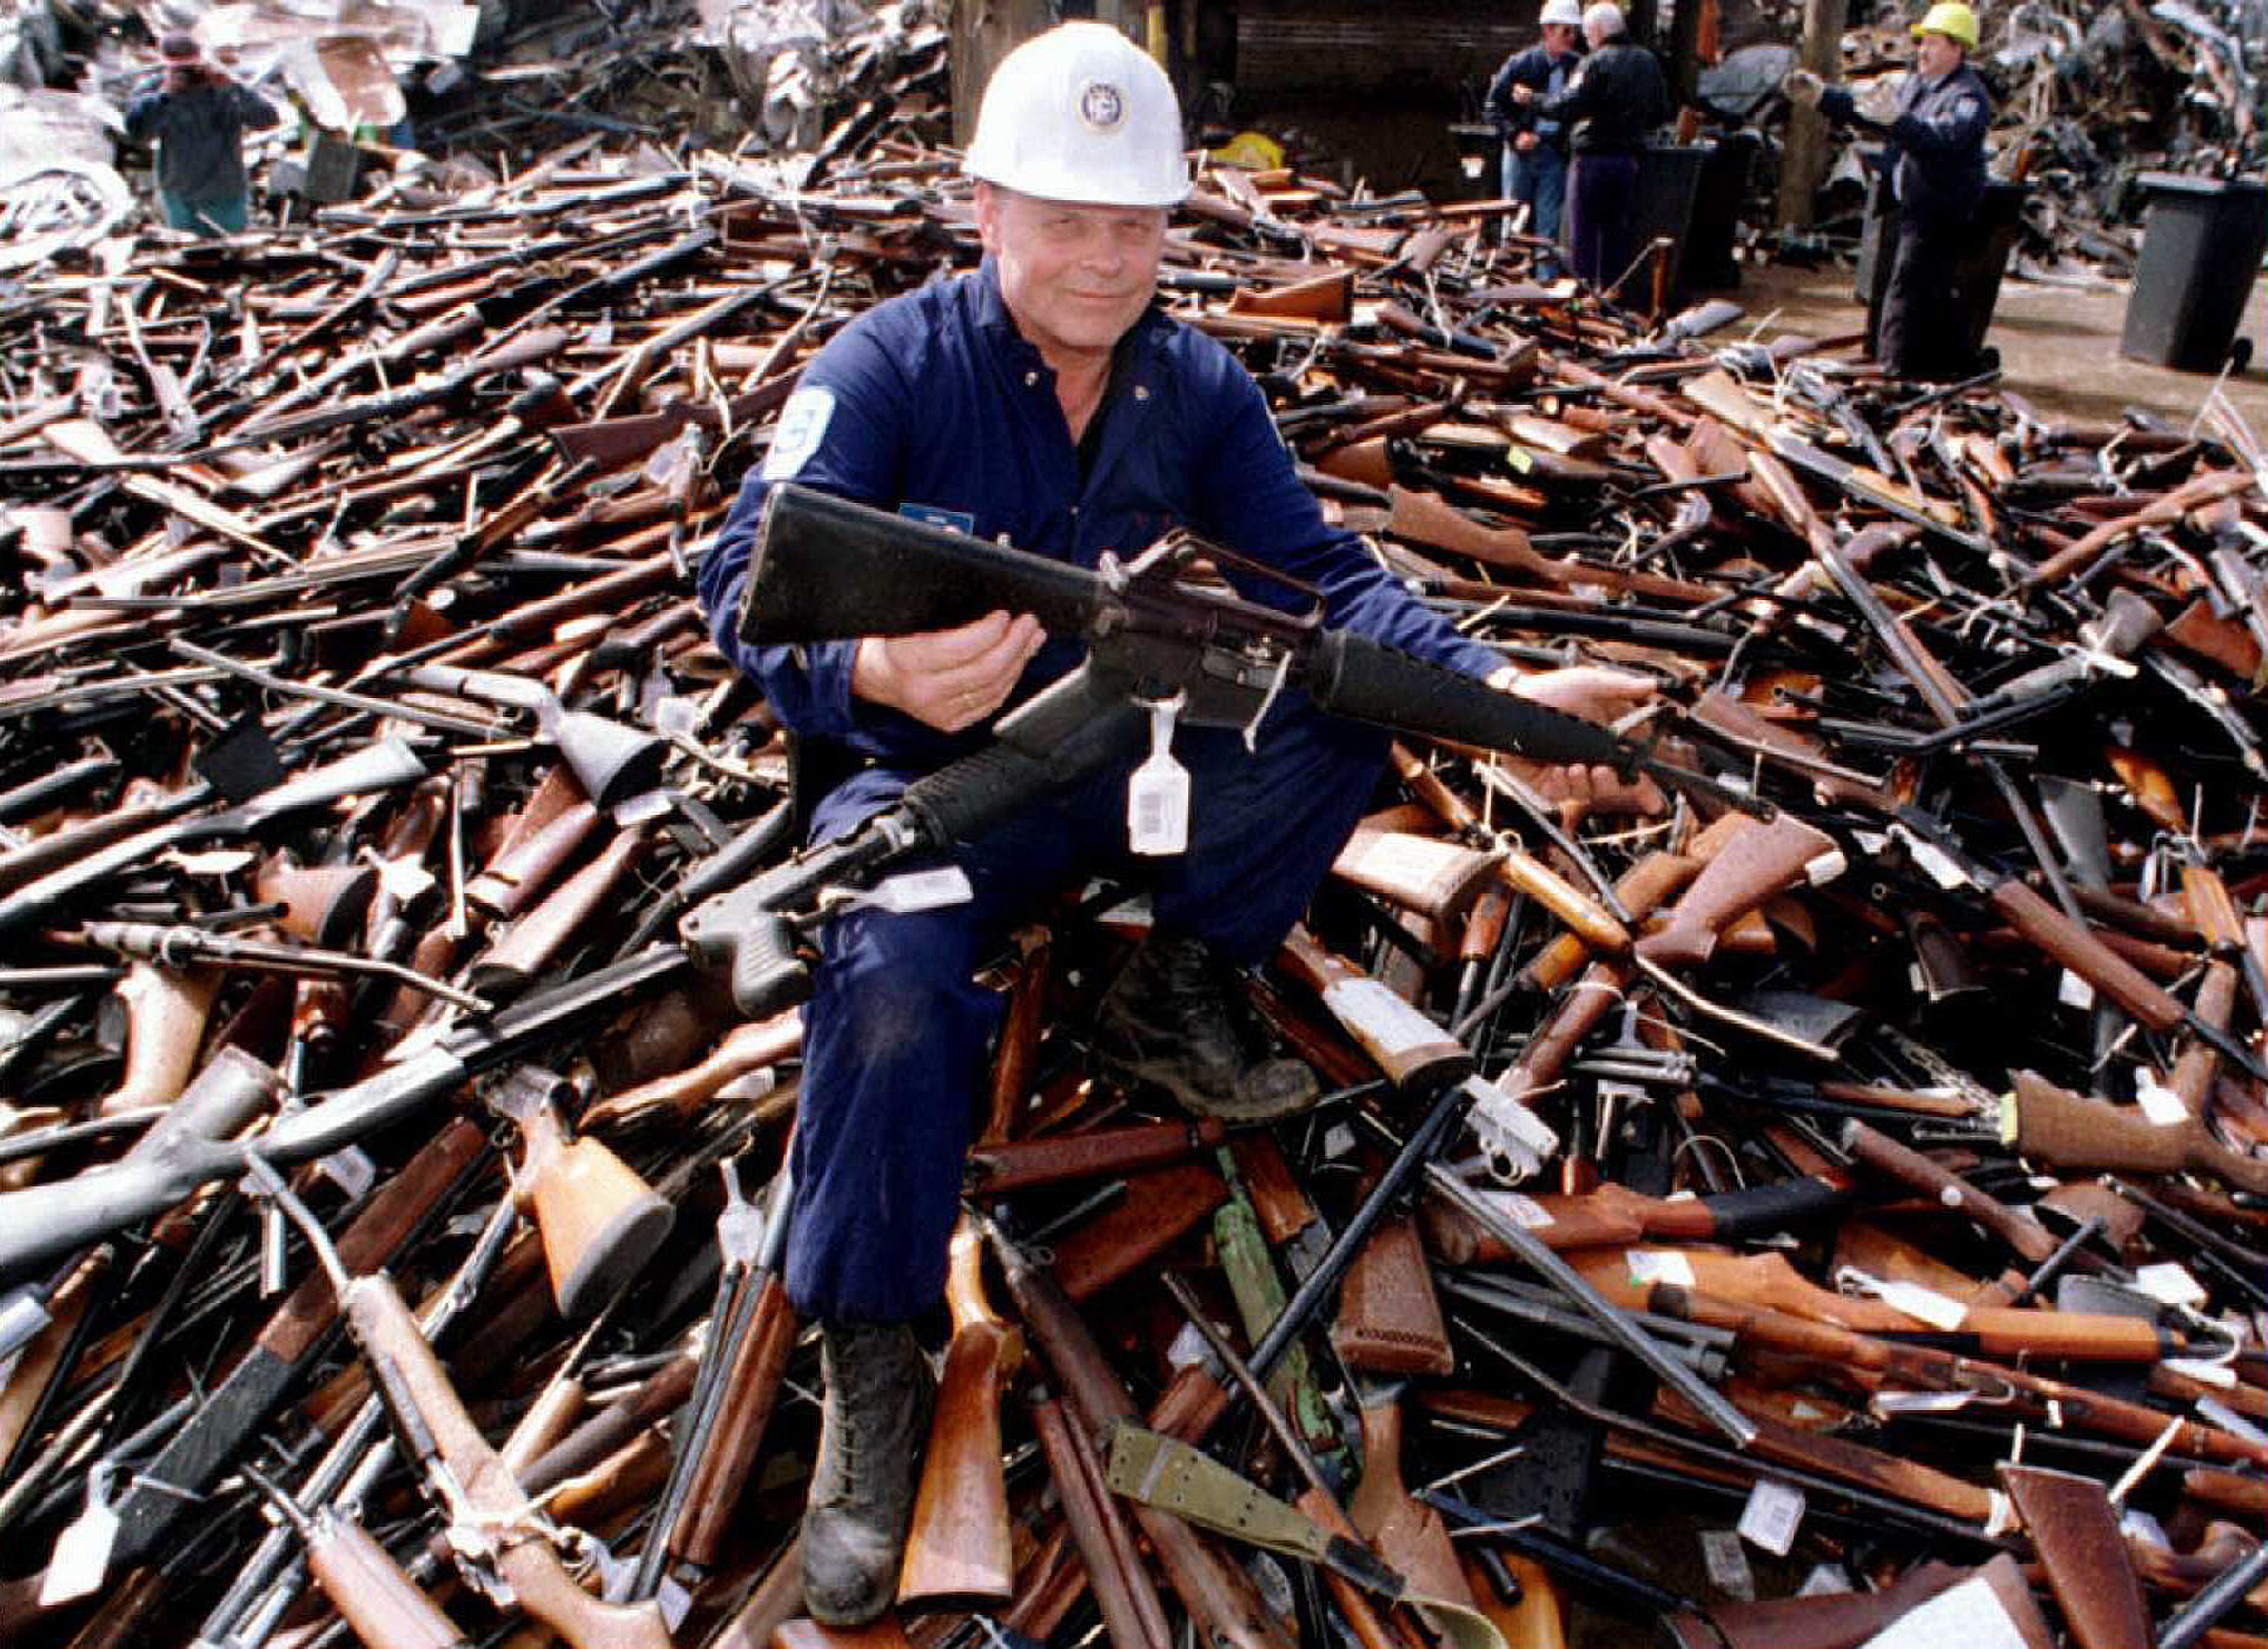 A person wearing a hardhat and holding an automatic rifle sits atop a pile of thousands of confiscated guns.